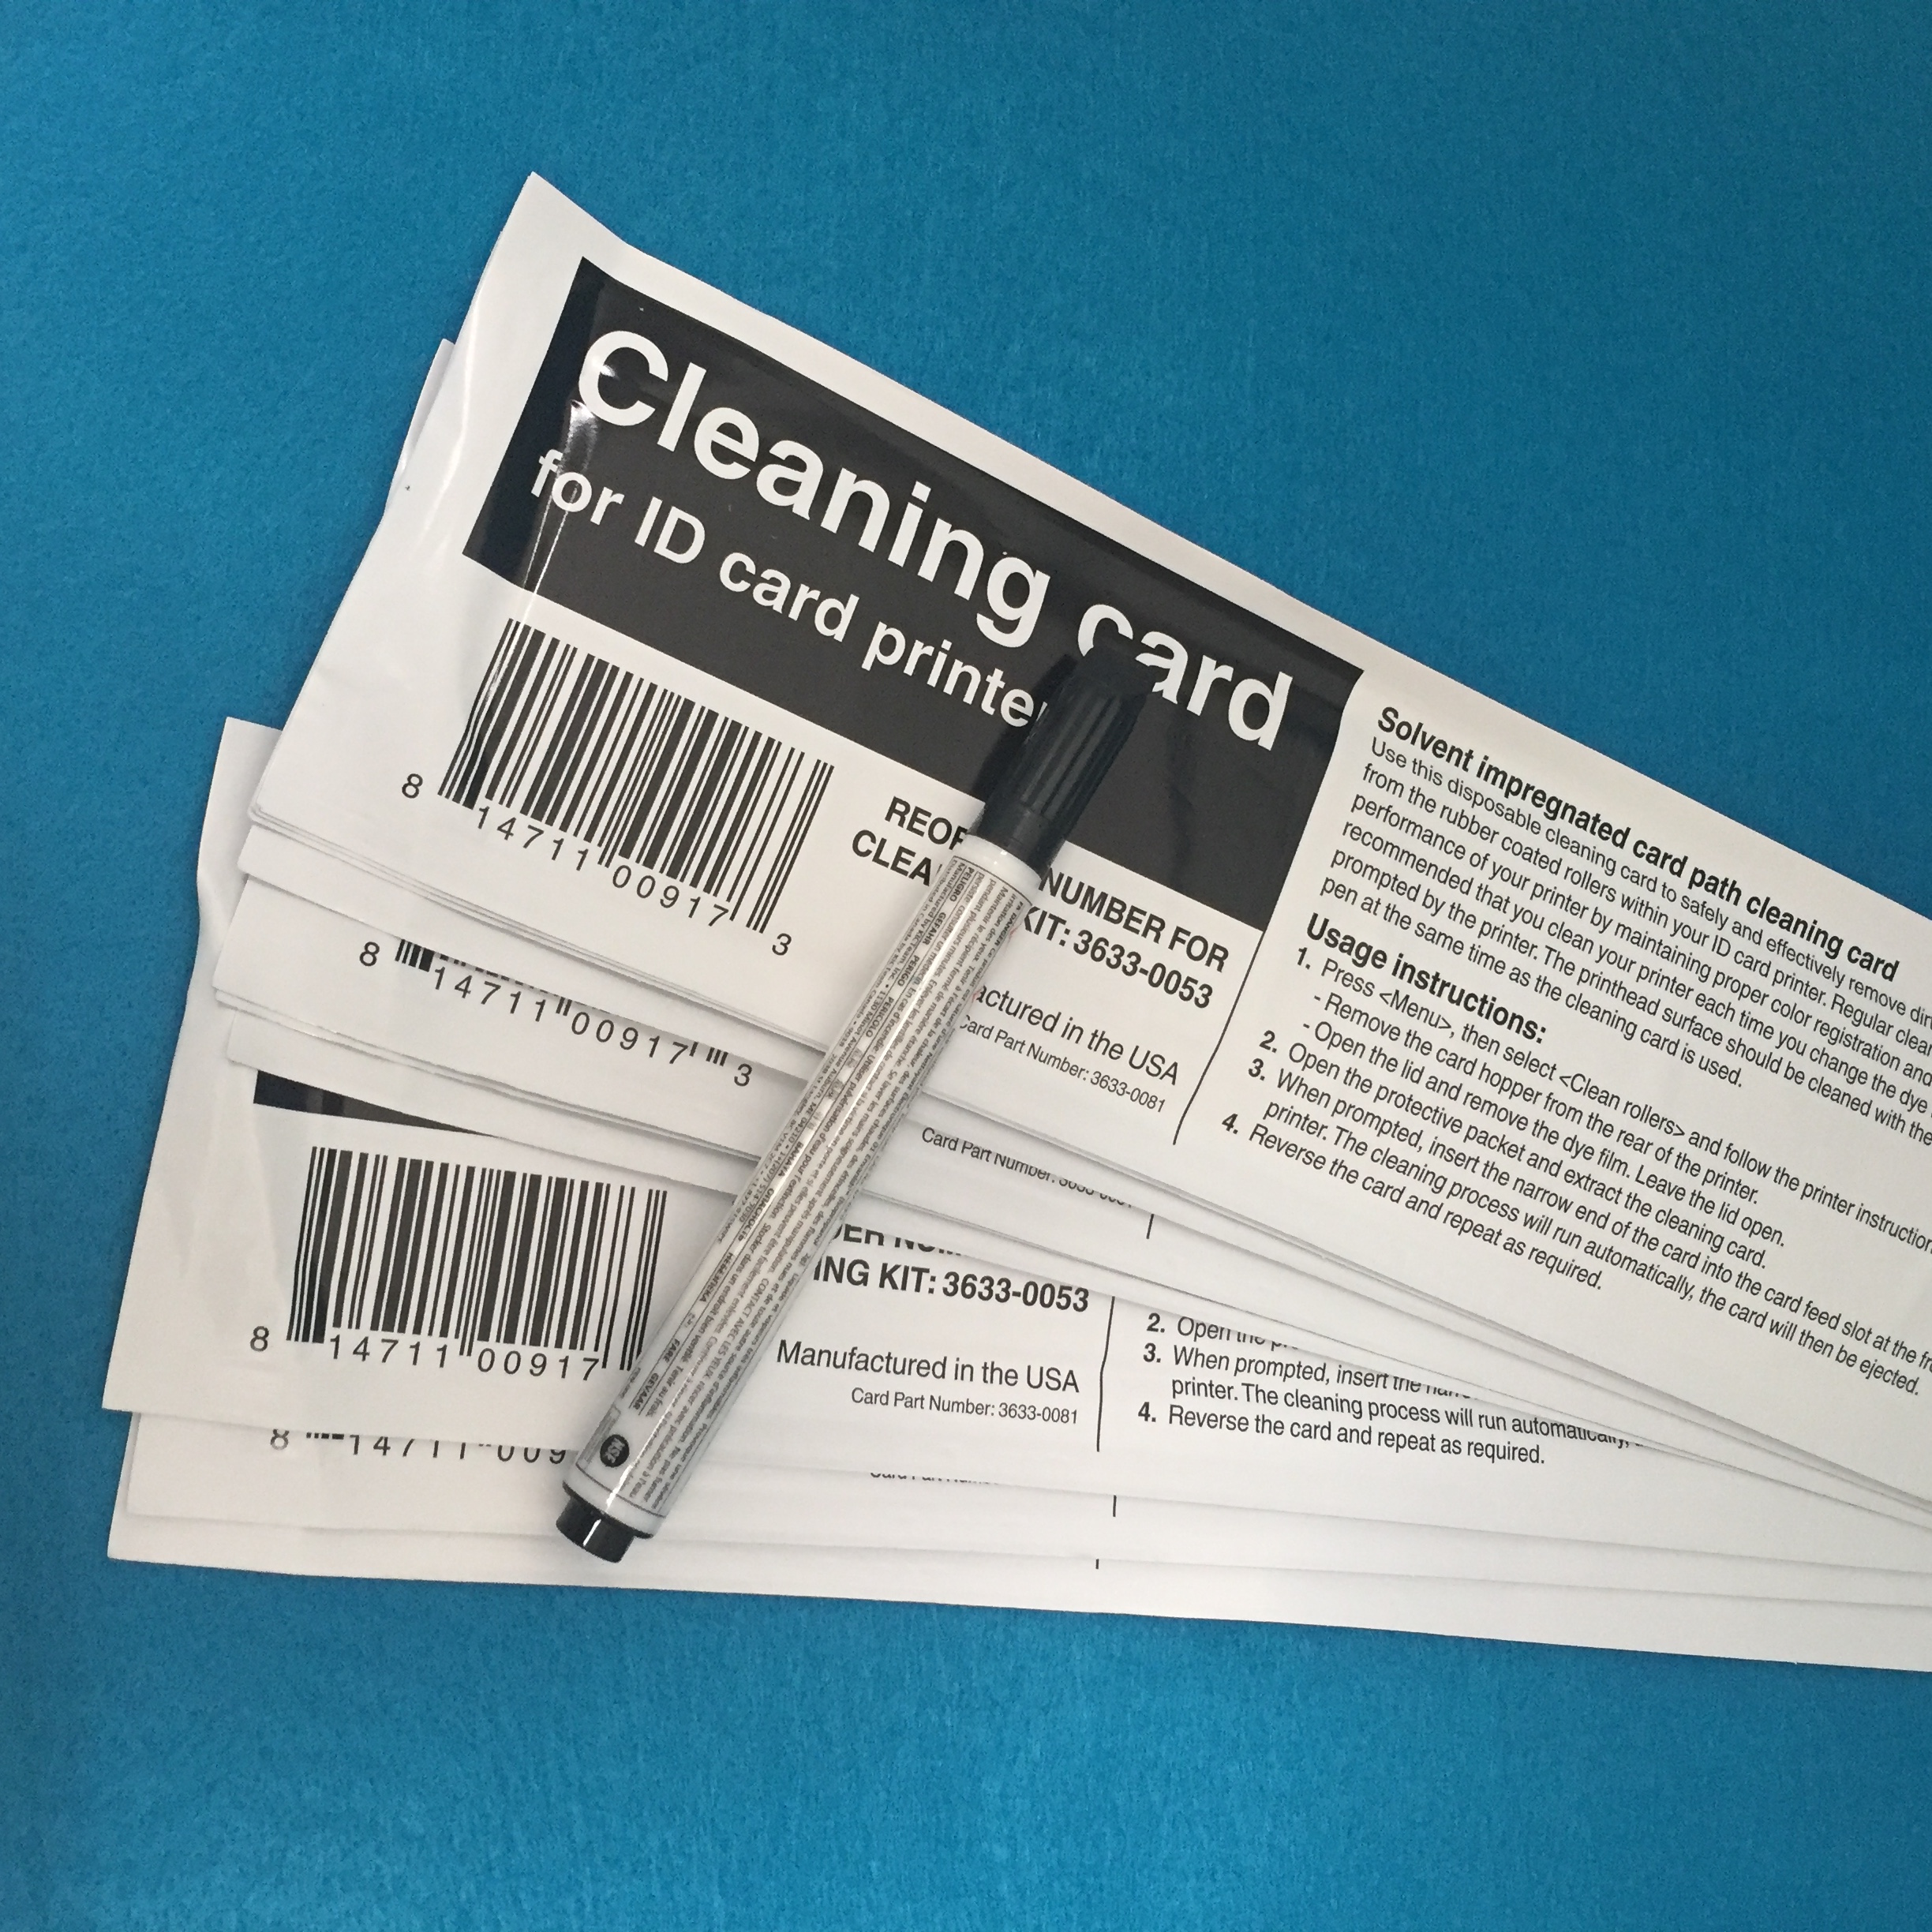 Magicard Enduro Cleaning Kit -10 cards - 1 pen 3633-0053